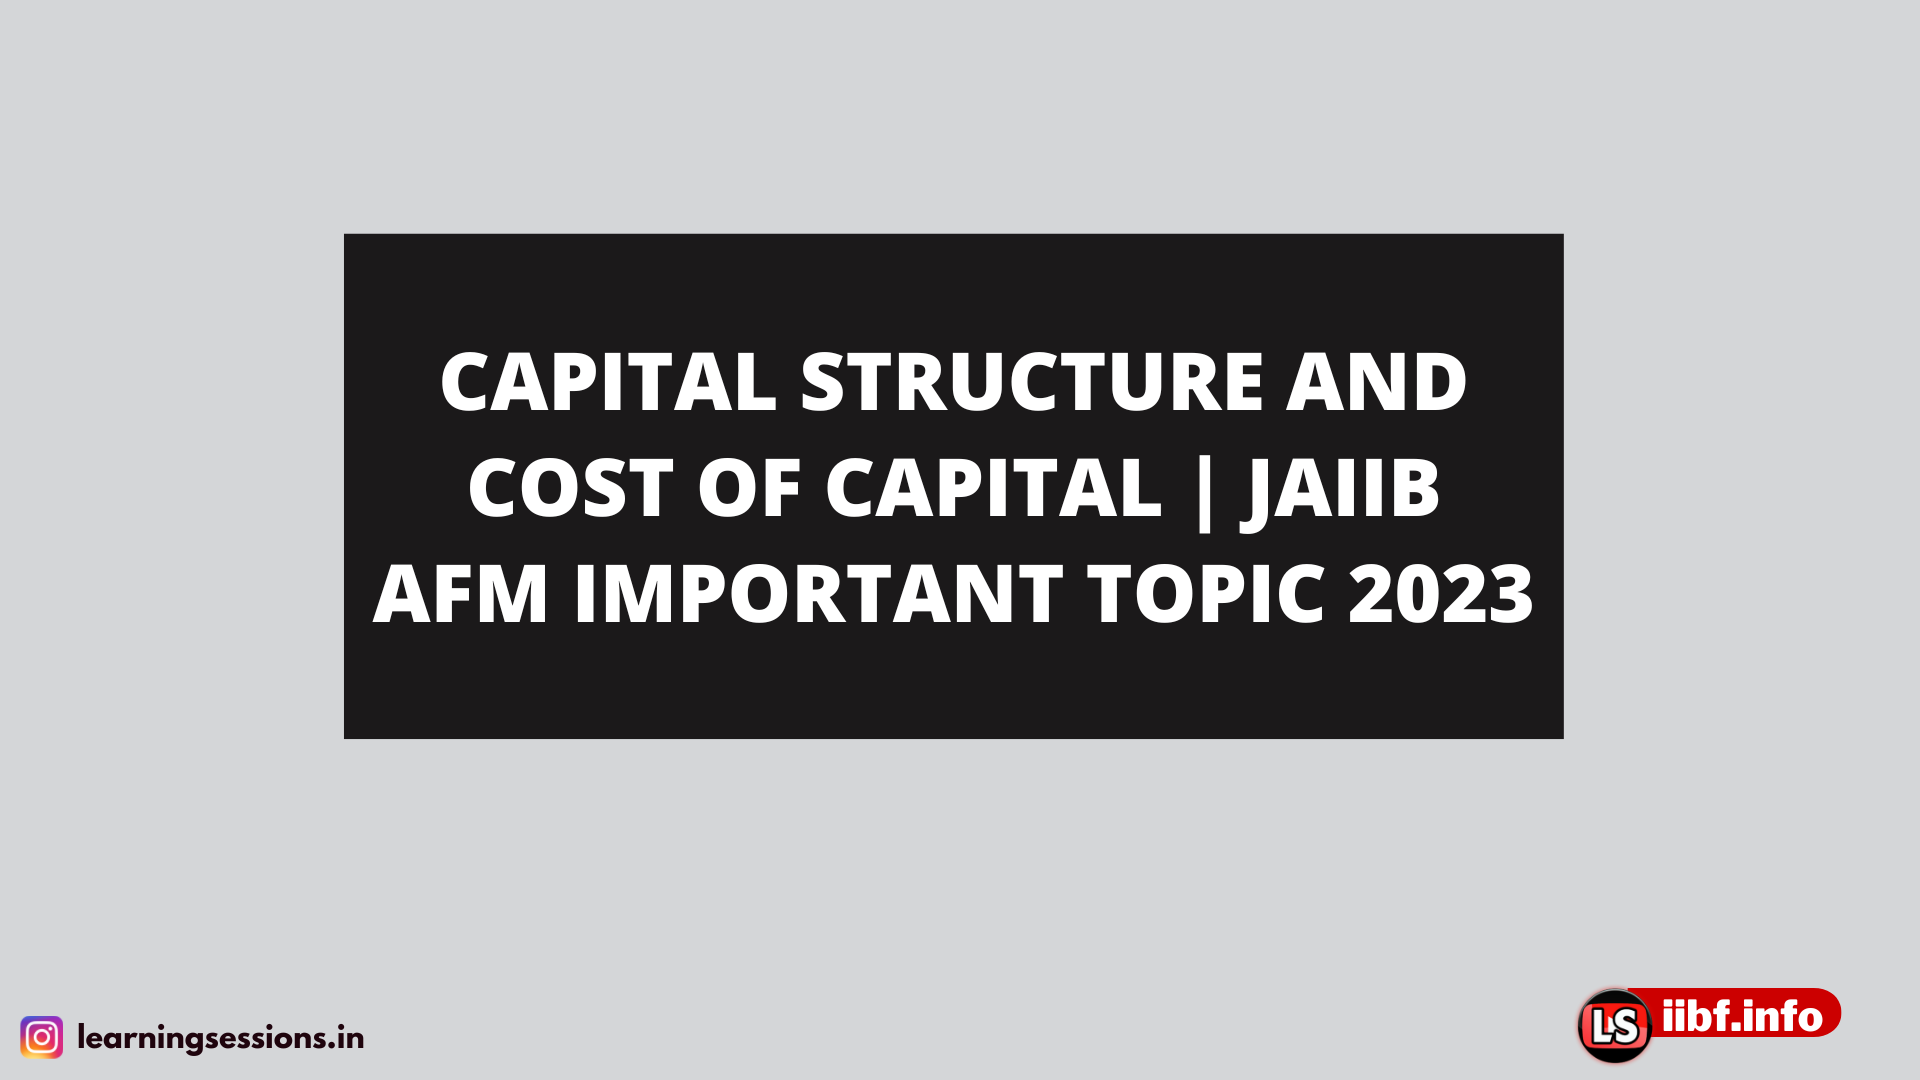 CAPITAL STRUCTURE AND COST OF CAPITAL | JAIIB AFM IMPORTANT TOPIC 2023